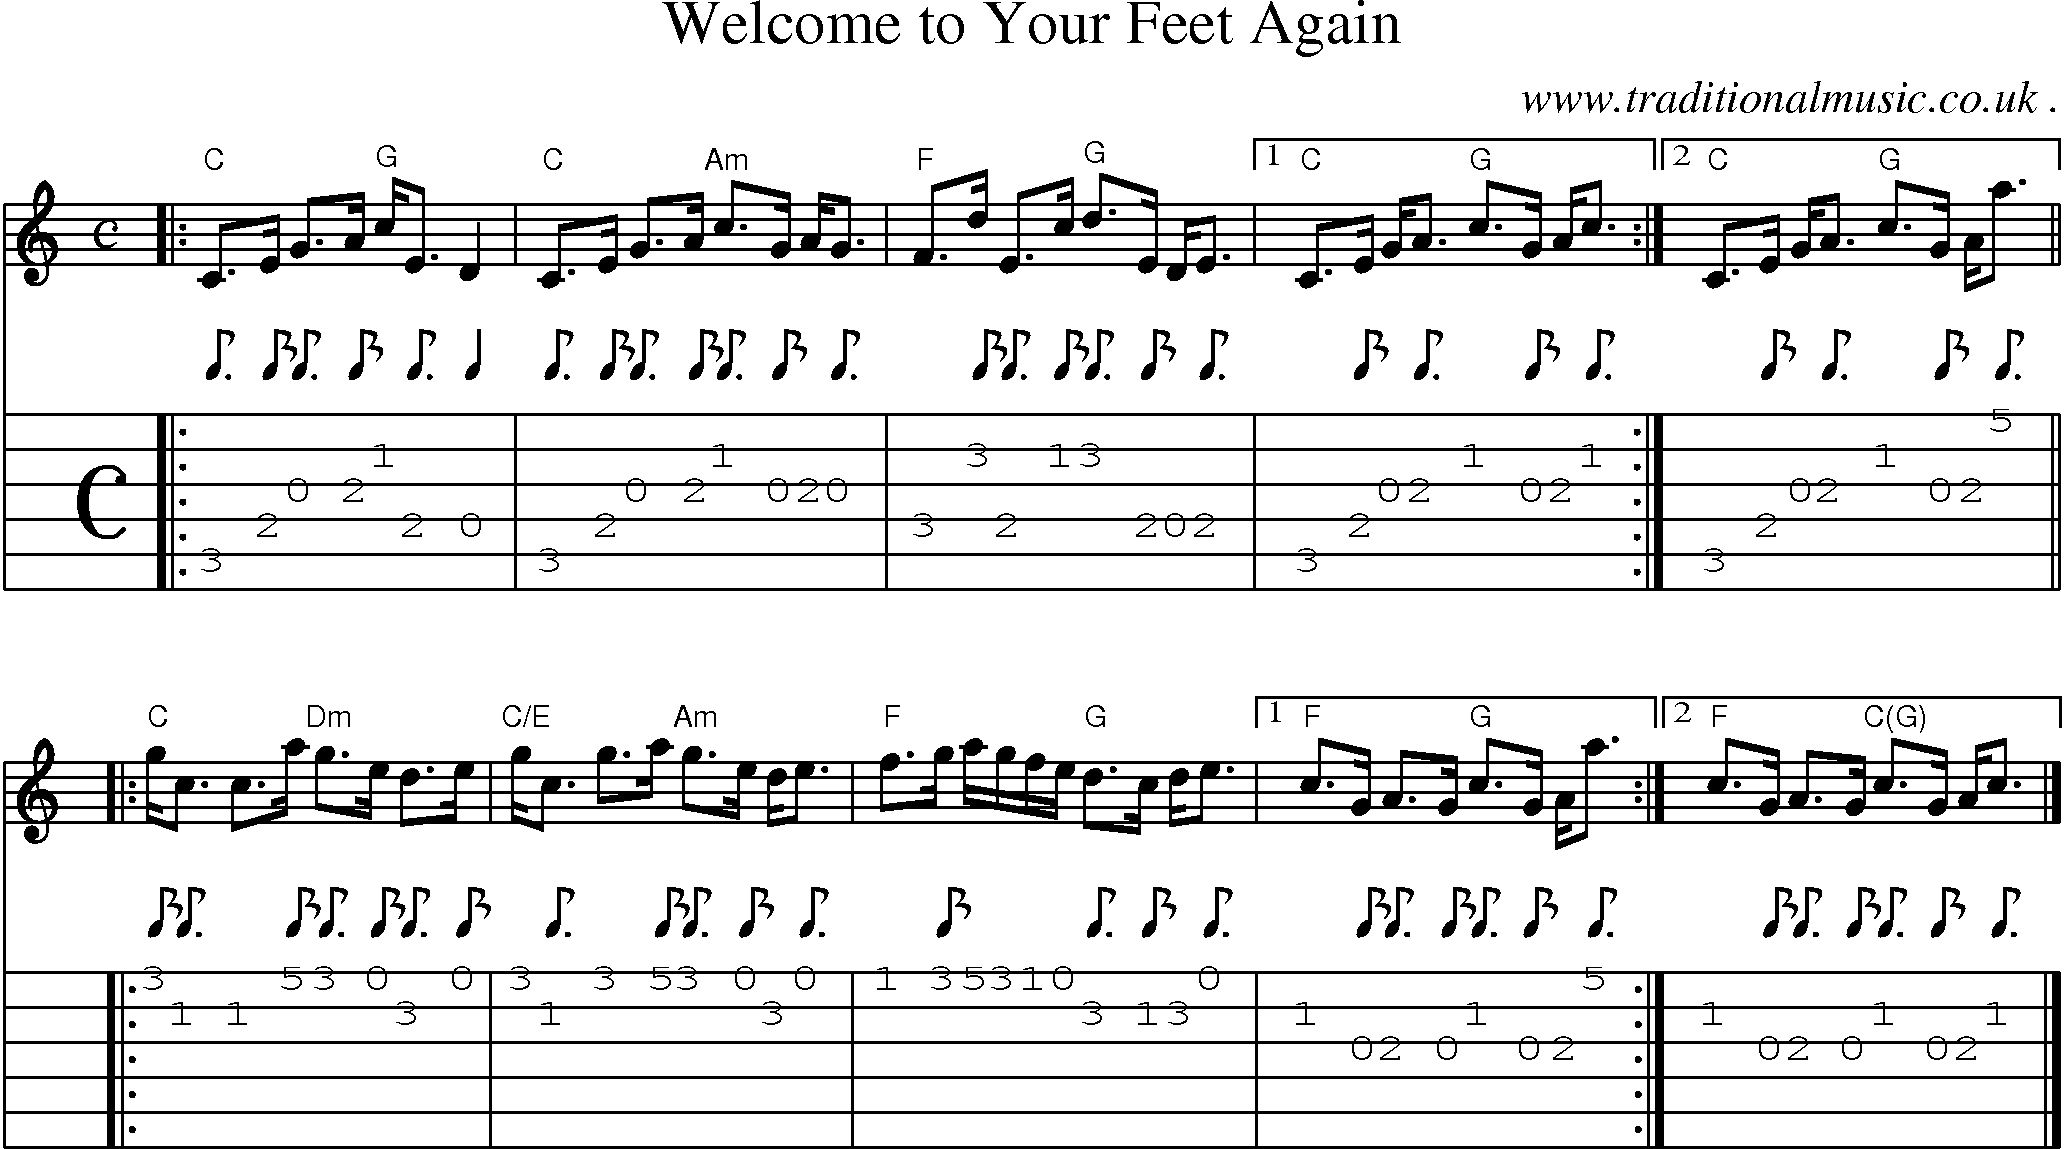 Sheet-music  score, Chords and Guitar Tabs for Welcome To Your Feet Again